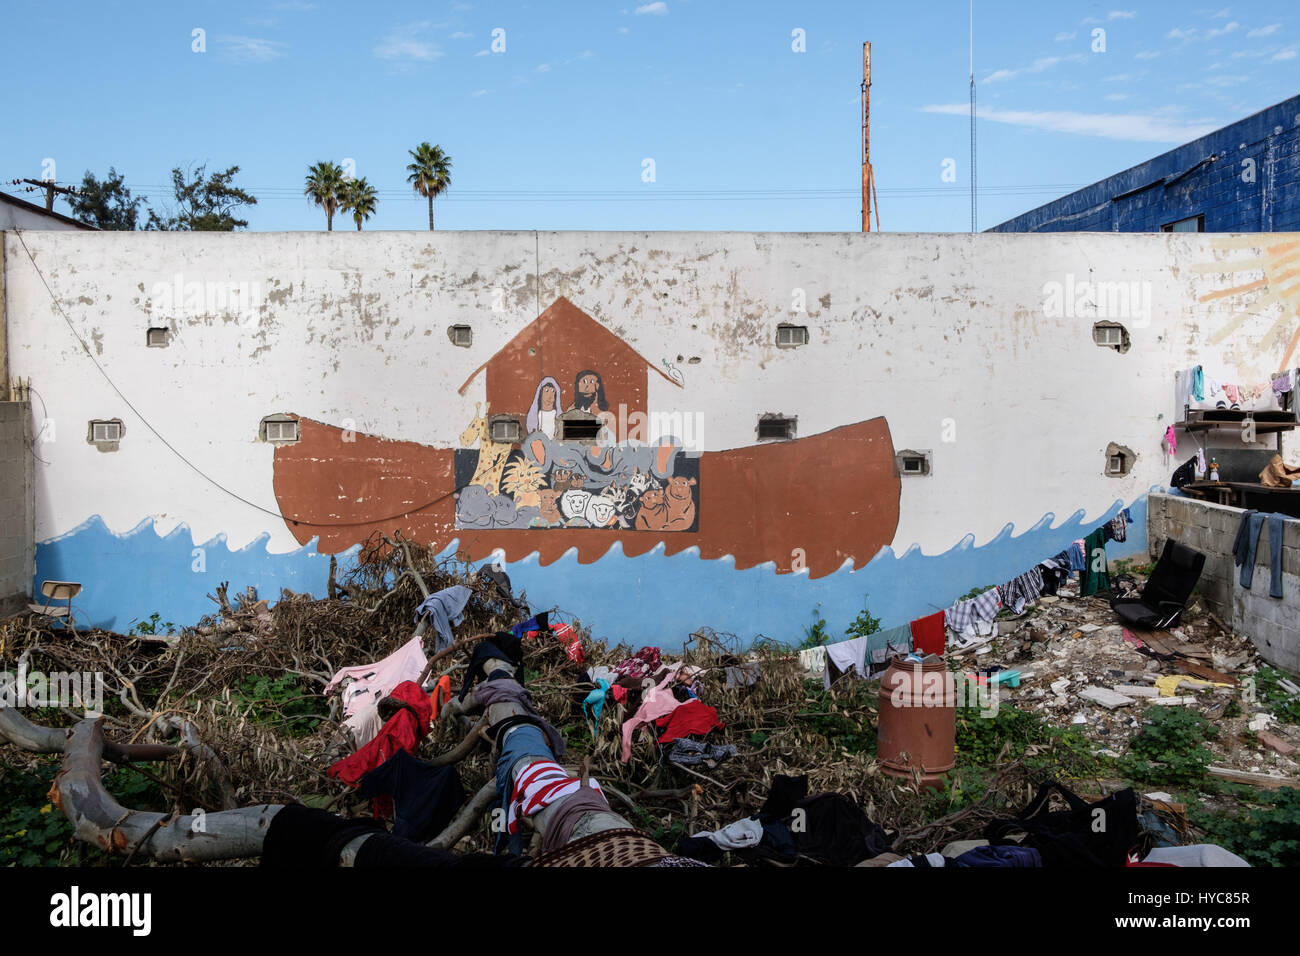 Shelter for Haitians. Tijuana, Mexico -  14/02/2017  -  Mexico / Baja California / Tijuana  -  Most shelters housing the Haitian community are converted churches, led by pastors that have responded to the crisis by offering such spaces as housing for large numbers of people. Before the large-scale migration of the Haitian community began in earnest during 2016, many pastors had little to no experience in running spaces set up like this, usually taking on these roles without any formal support.   -  Alexandre Afonso / Le Pictorium Stock Photo